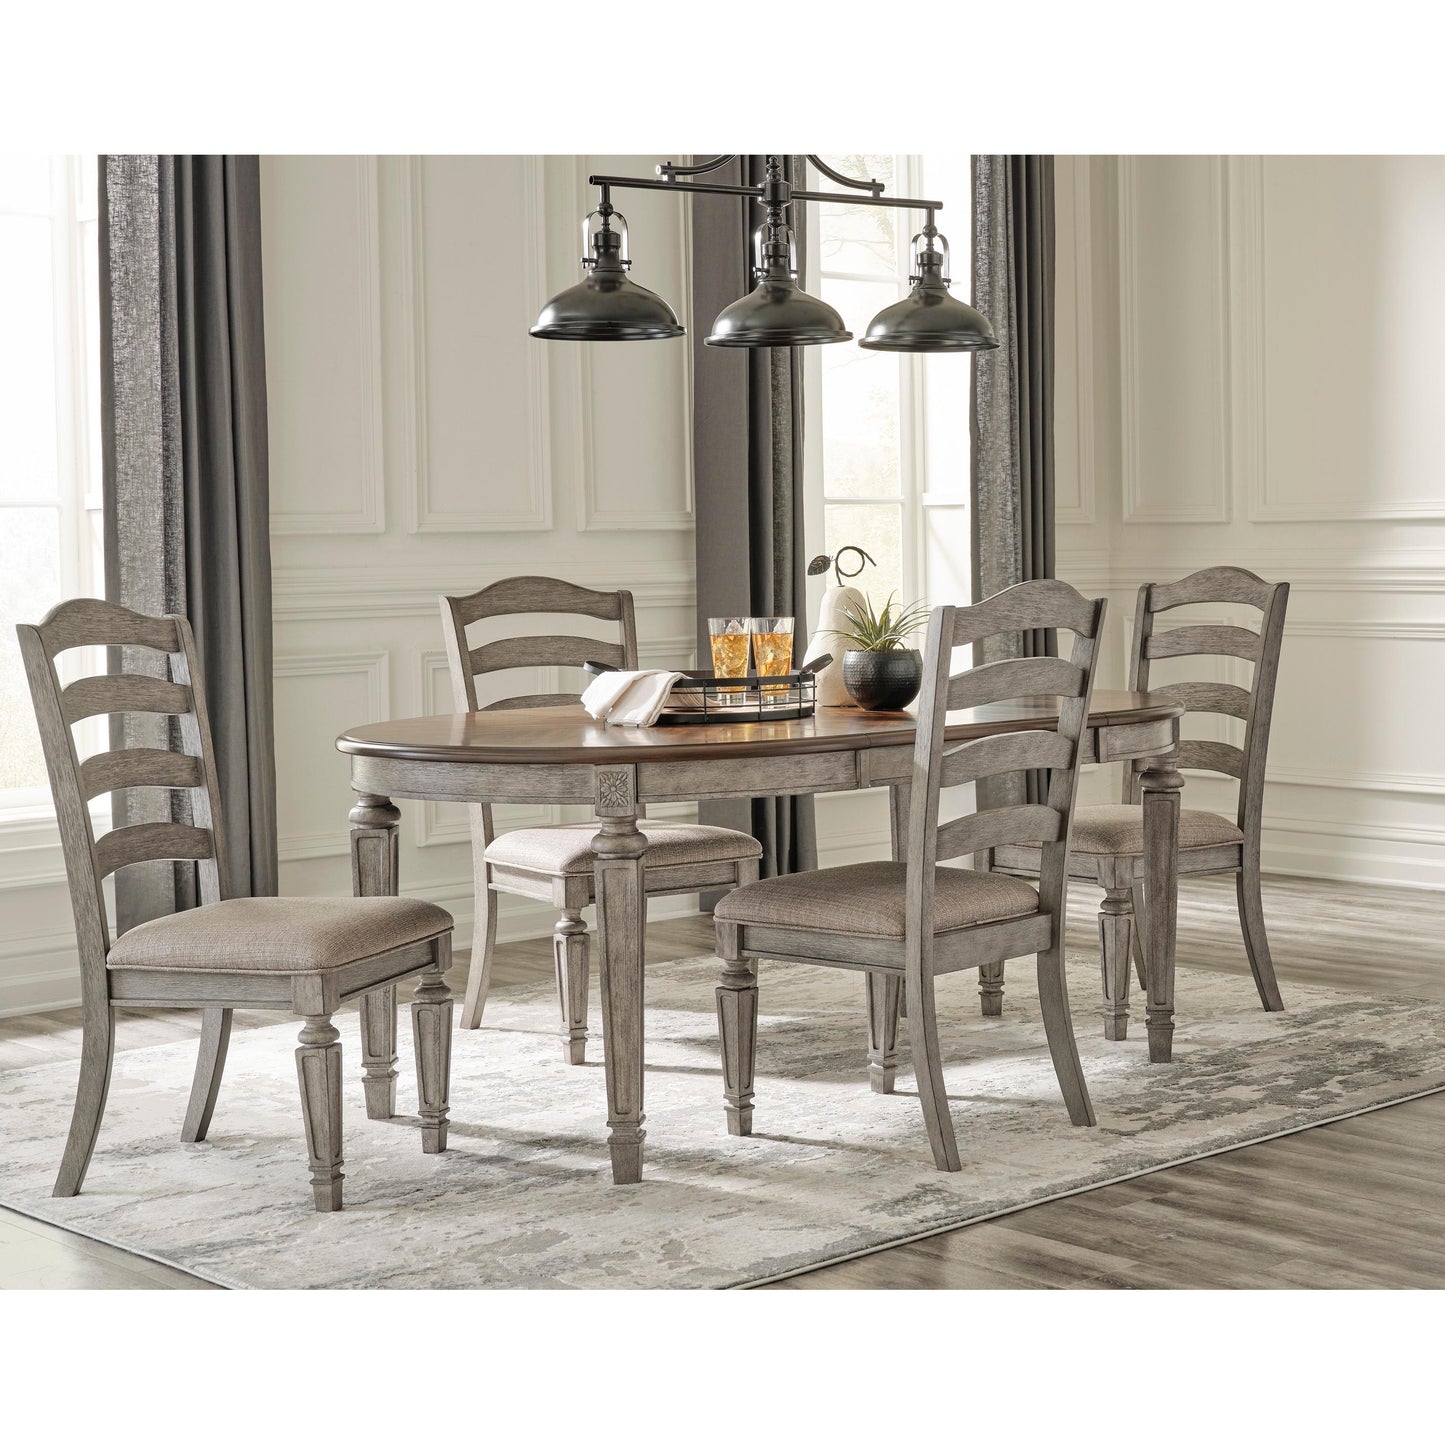 Signature Design by Ashley Lodenbay D751D1 5 pc Dining Set IMAGE 1